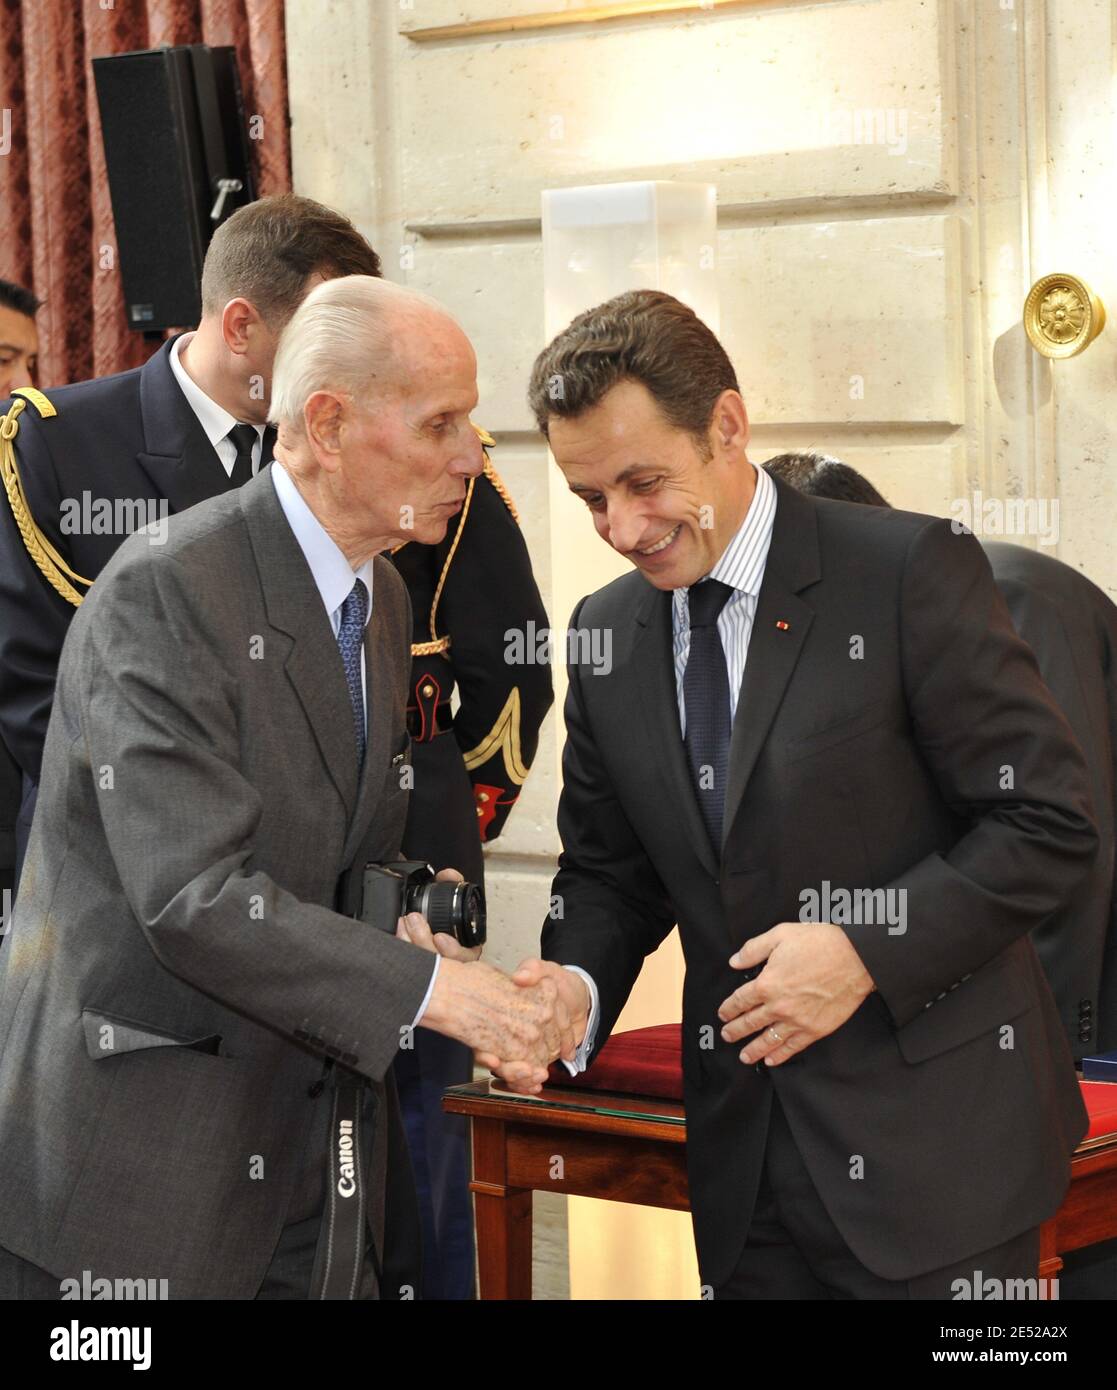 French President Nicolas Sarkozy shakes hands with Yann Arthus-Bertrand's father during a ceremony to award renowned French photographer and environmentalist Yann Arthus-Bertrand with the medal of Officier de l'Ordre National du Merite, at the Elysee Palace in Paris, France on June 17, 2008. Photo by Mousse/ABACAPRESS.COM Stock Photo